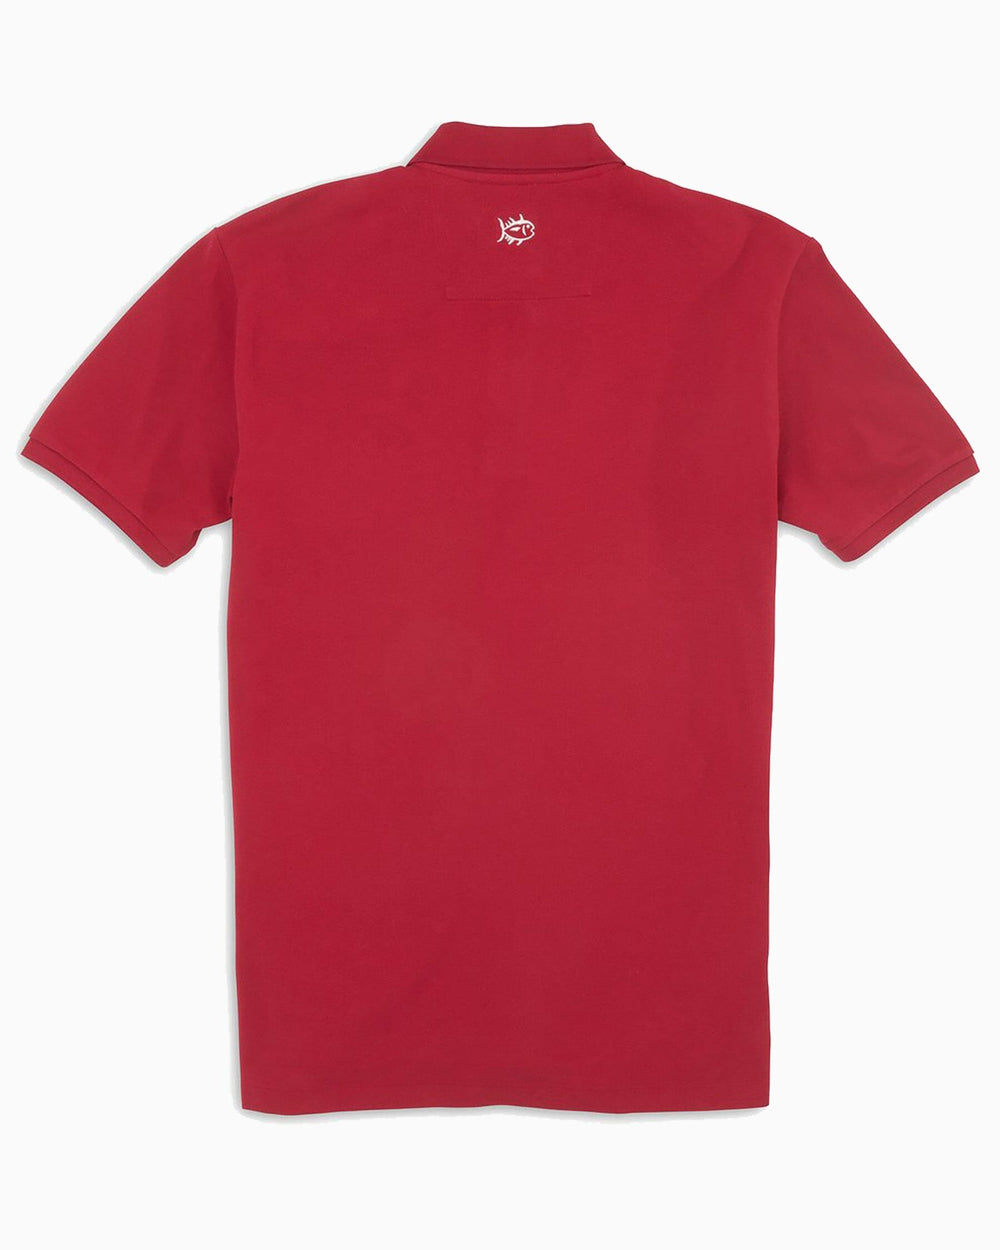 The back view of the Men's Red Skipjack Gameday Colors Polo Shirt by Southern Tide - Crimson